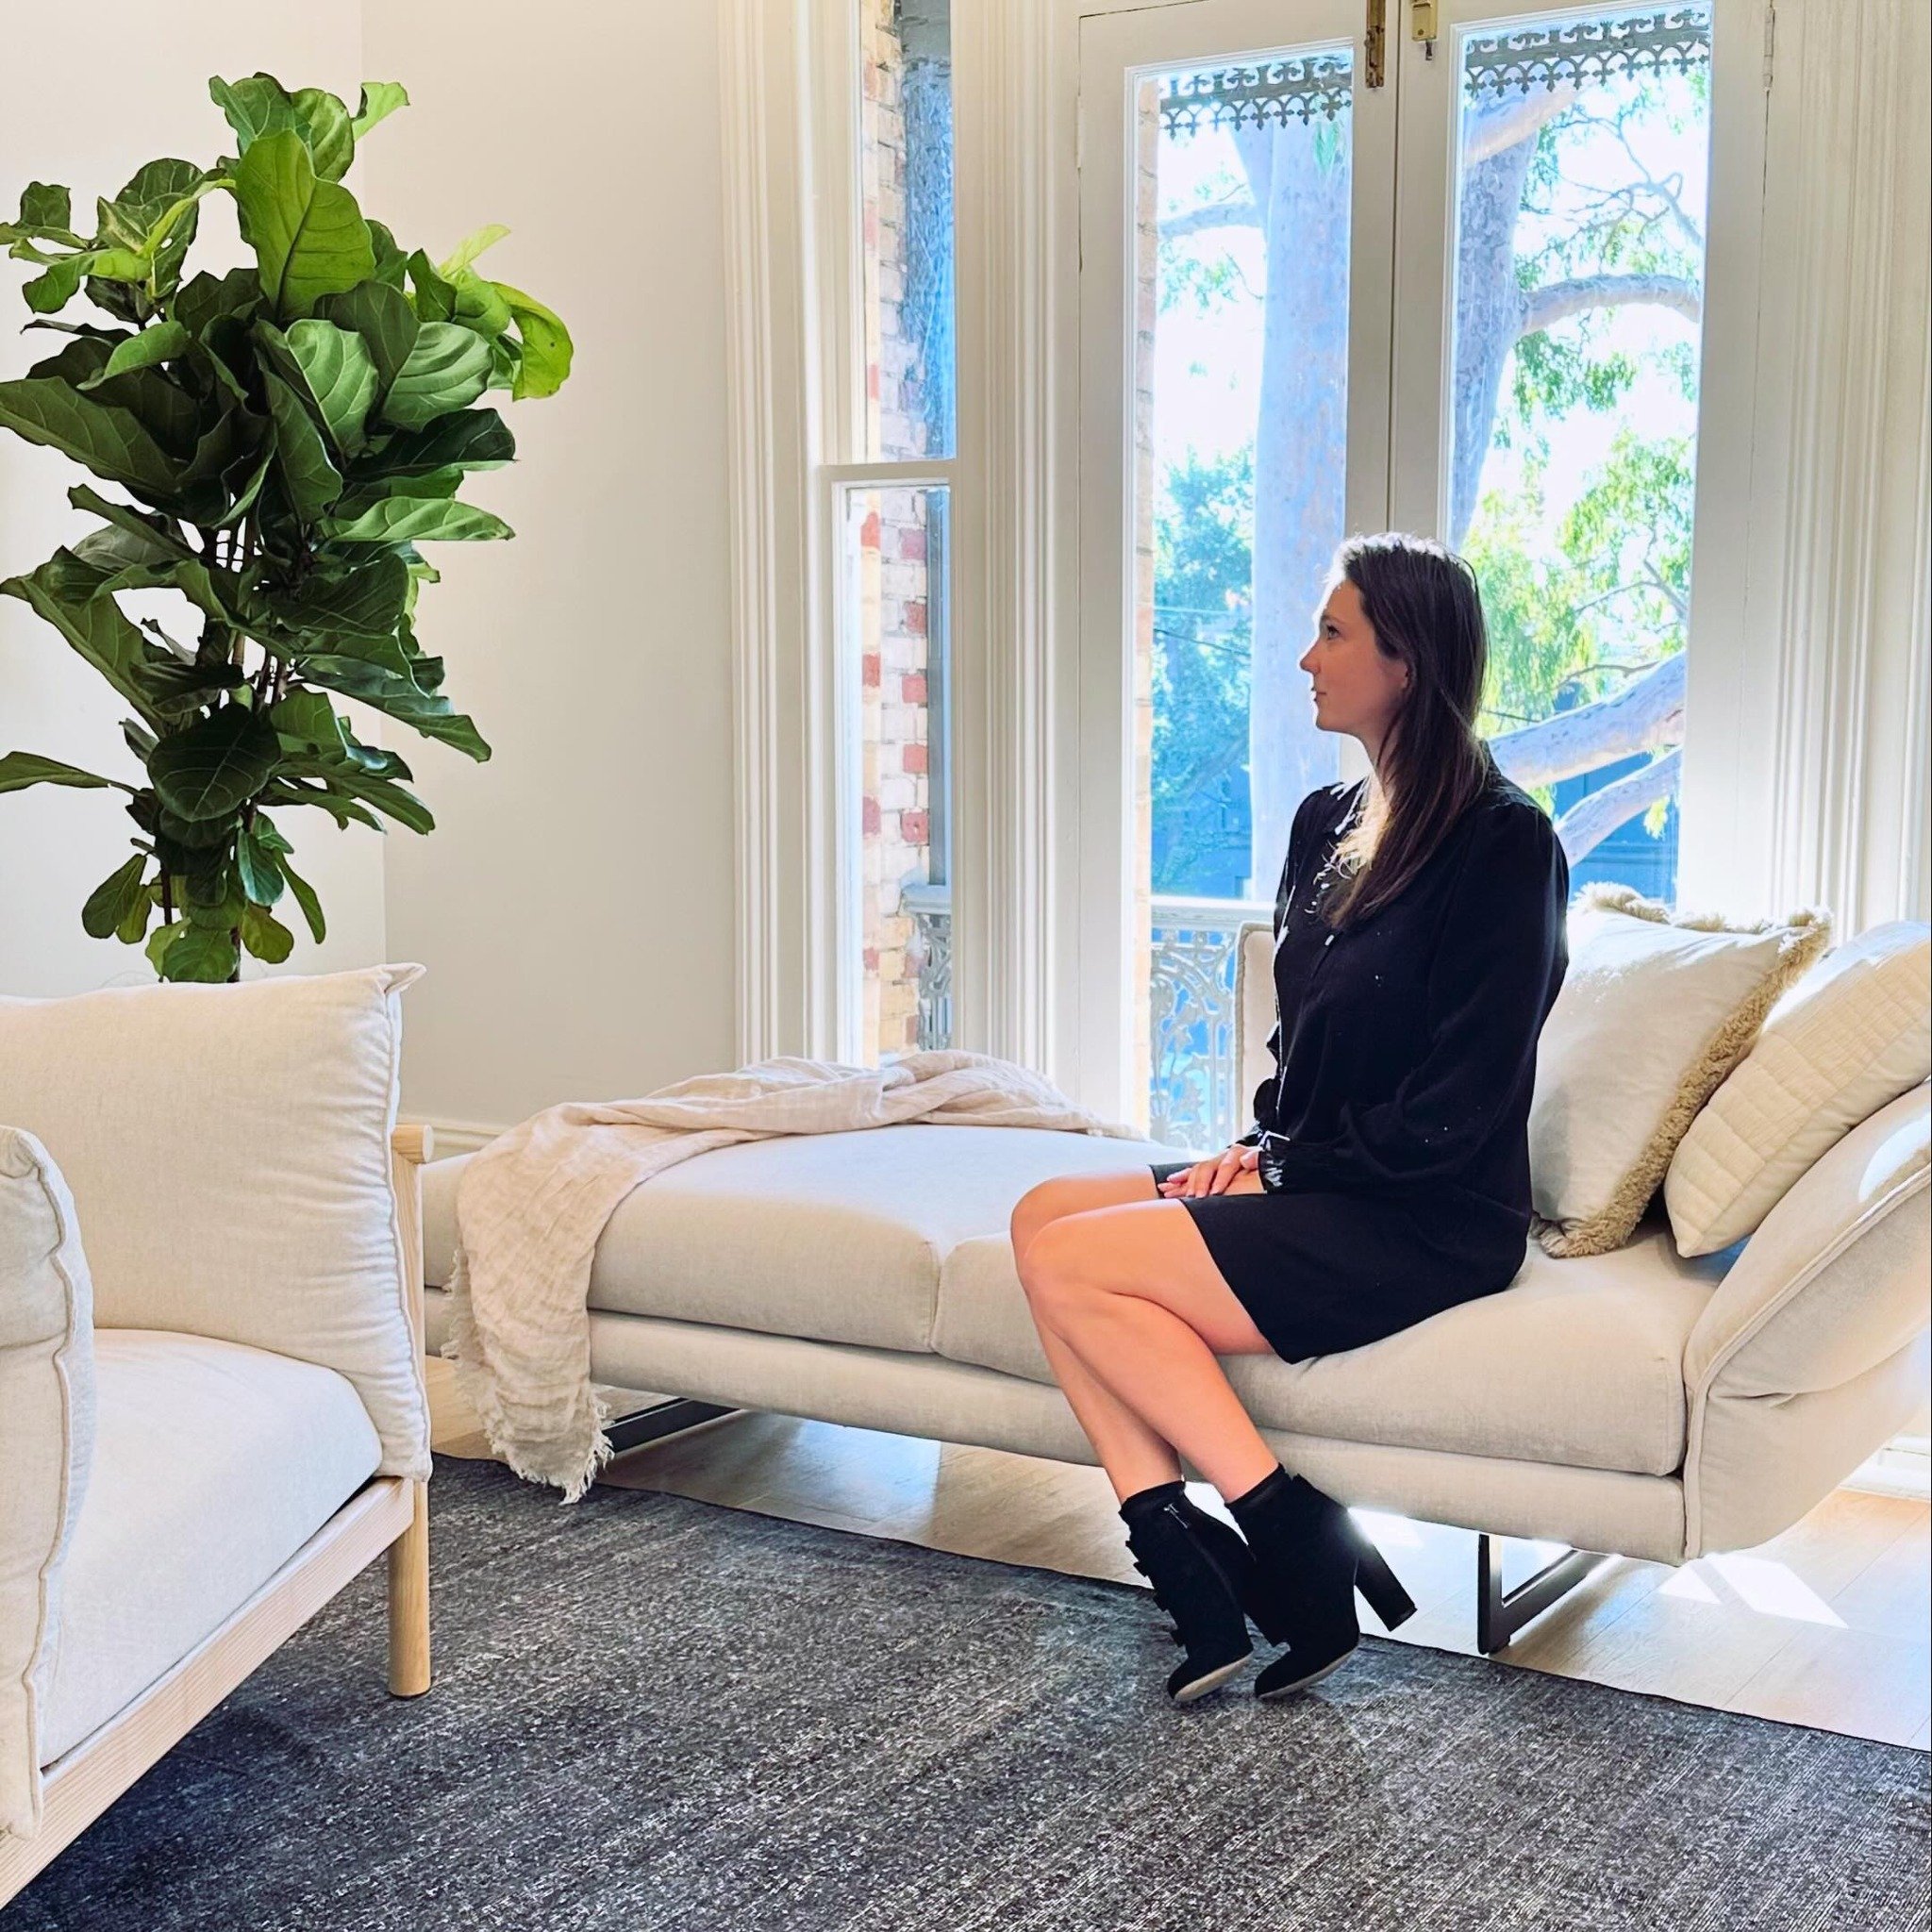 We are here for you when you need a home for your feelings ||
 
At Illume Psychology, we understand that meaningful change begins with being heard and understood. Our therapeutic space is designed to be your sanctuary and provide a home for your feel